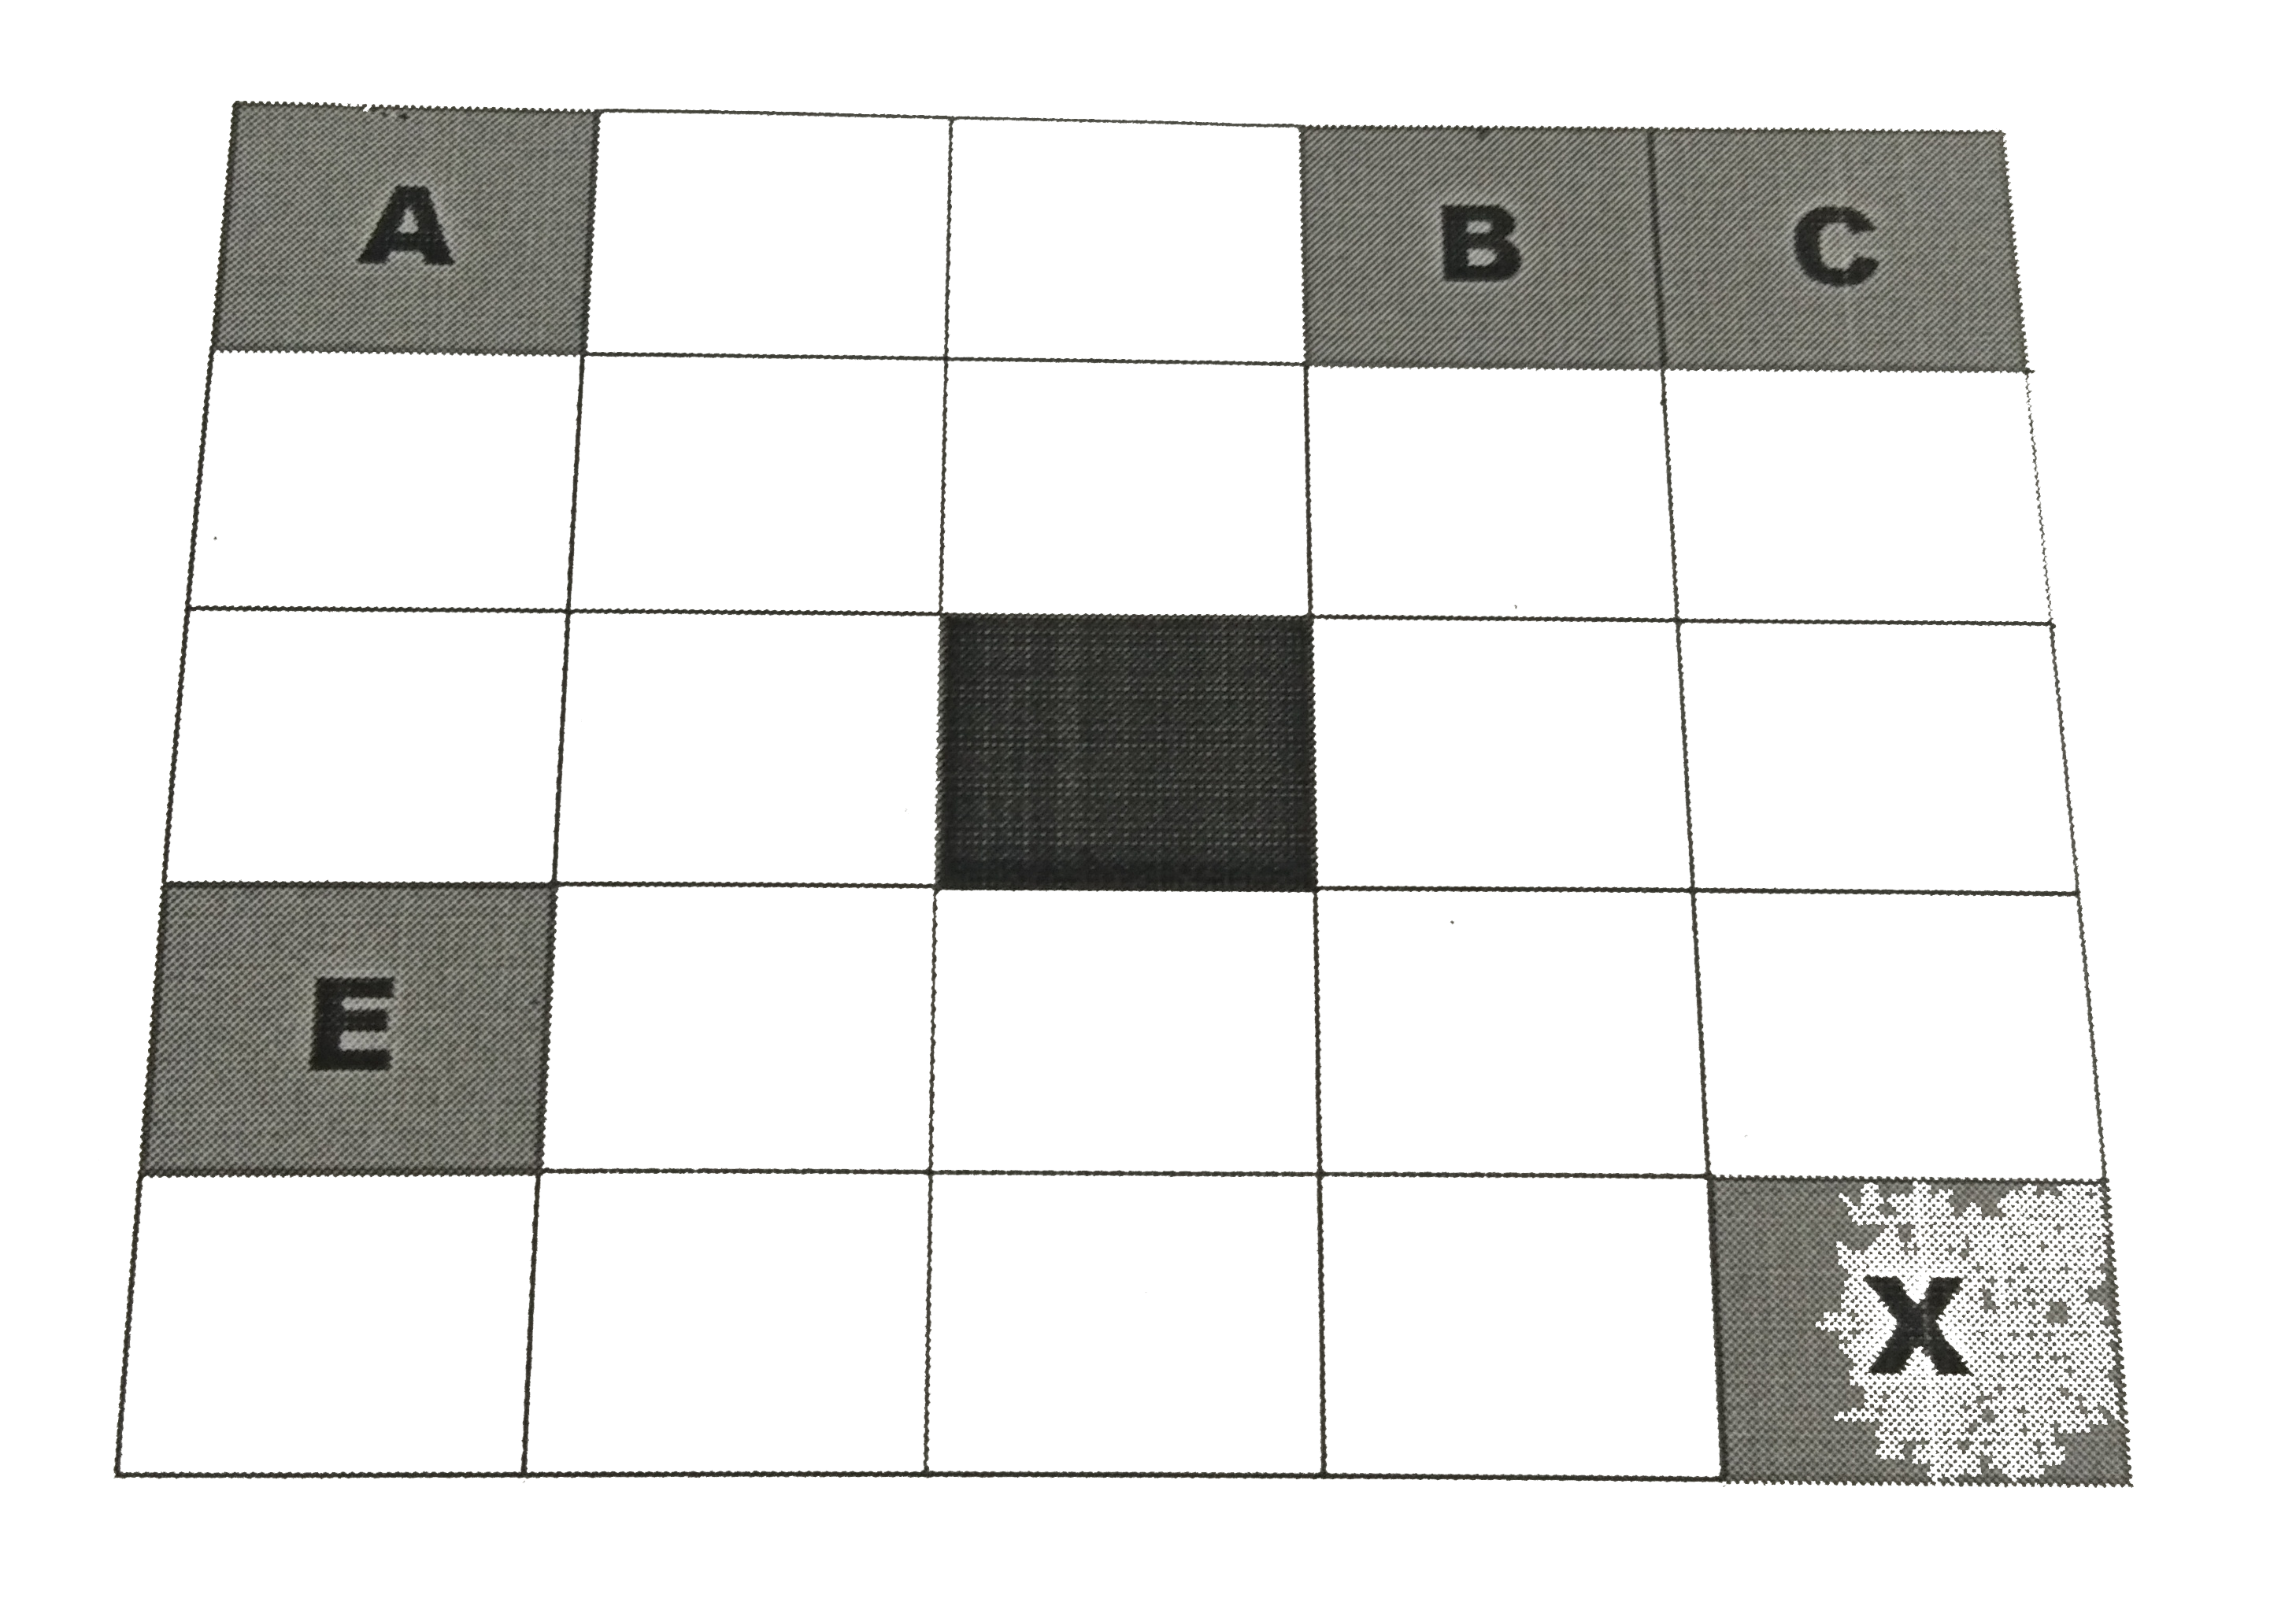 The goal of each puzzle is to end up in center space within the specified number of moves. Your location is indicated by X. There are five robots that you can control, indicated by A-E. Each robot travels horizontally or vertically,       but only directly toward another robot – as far as it can go until hitting it edge to edge. A set of moves is a continuous sequence of such moves made by the same robot. What are the number of moves made by each robot, total number of moves by you and total set of moves for each case? (A-B-C-D-E-X-Total)